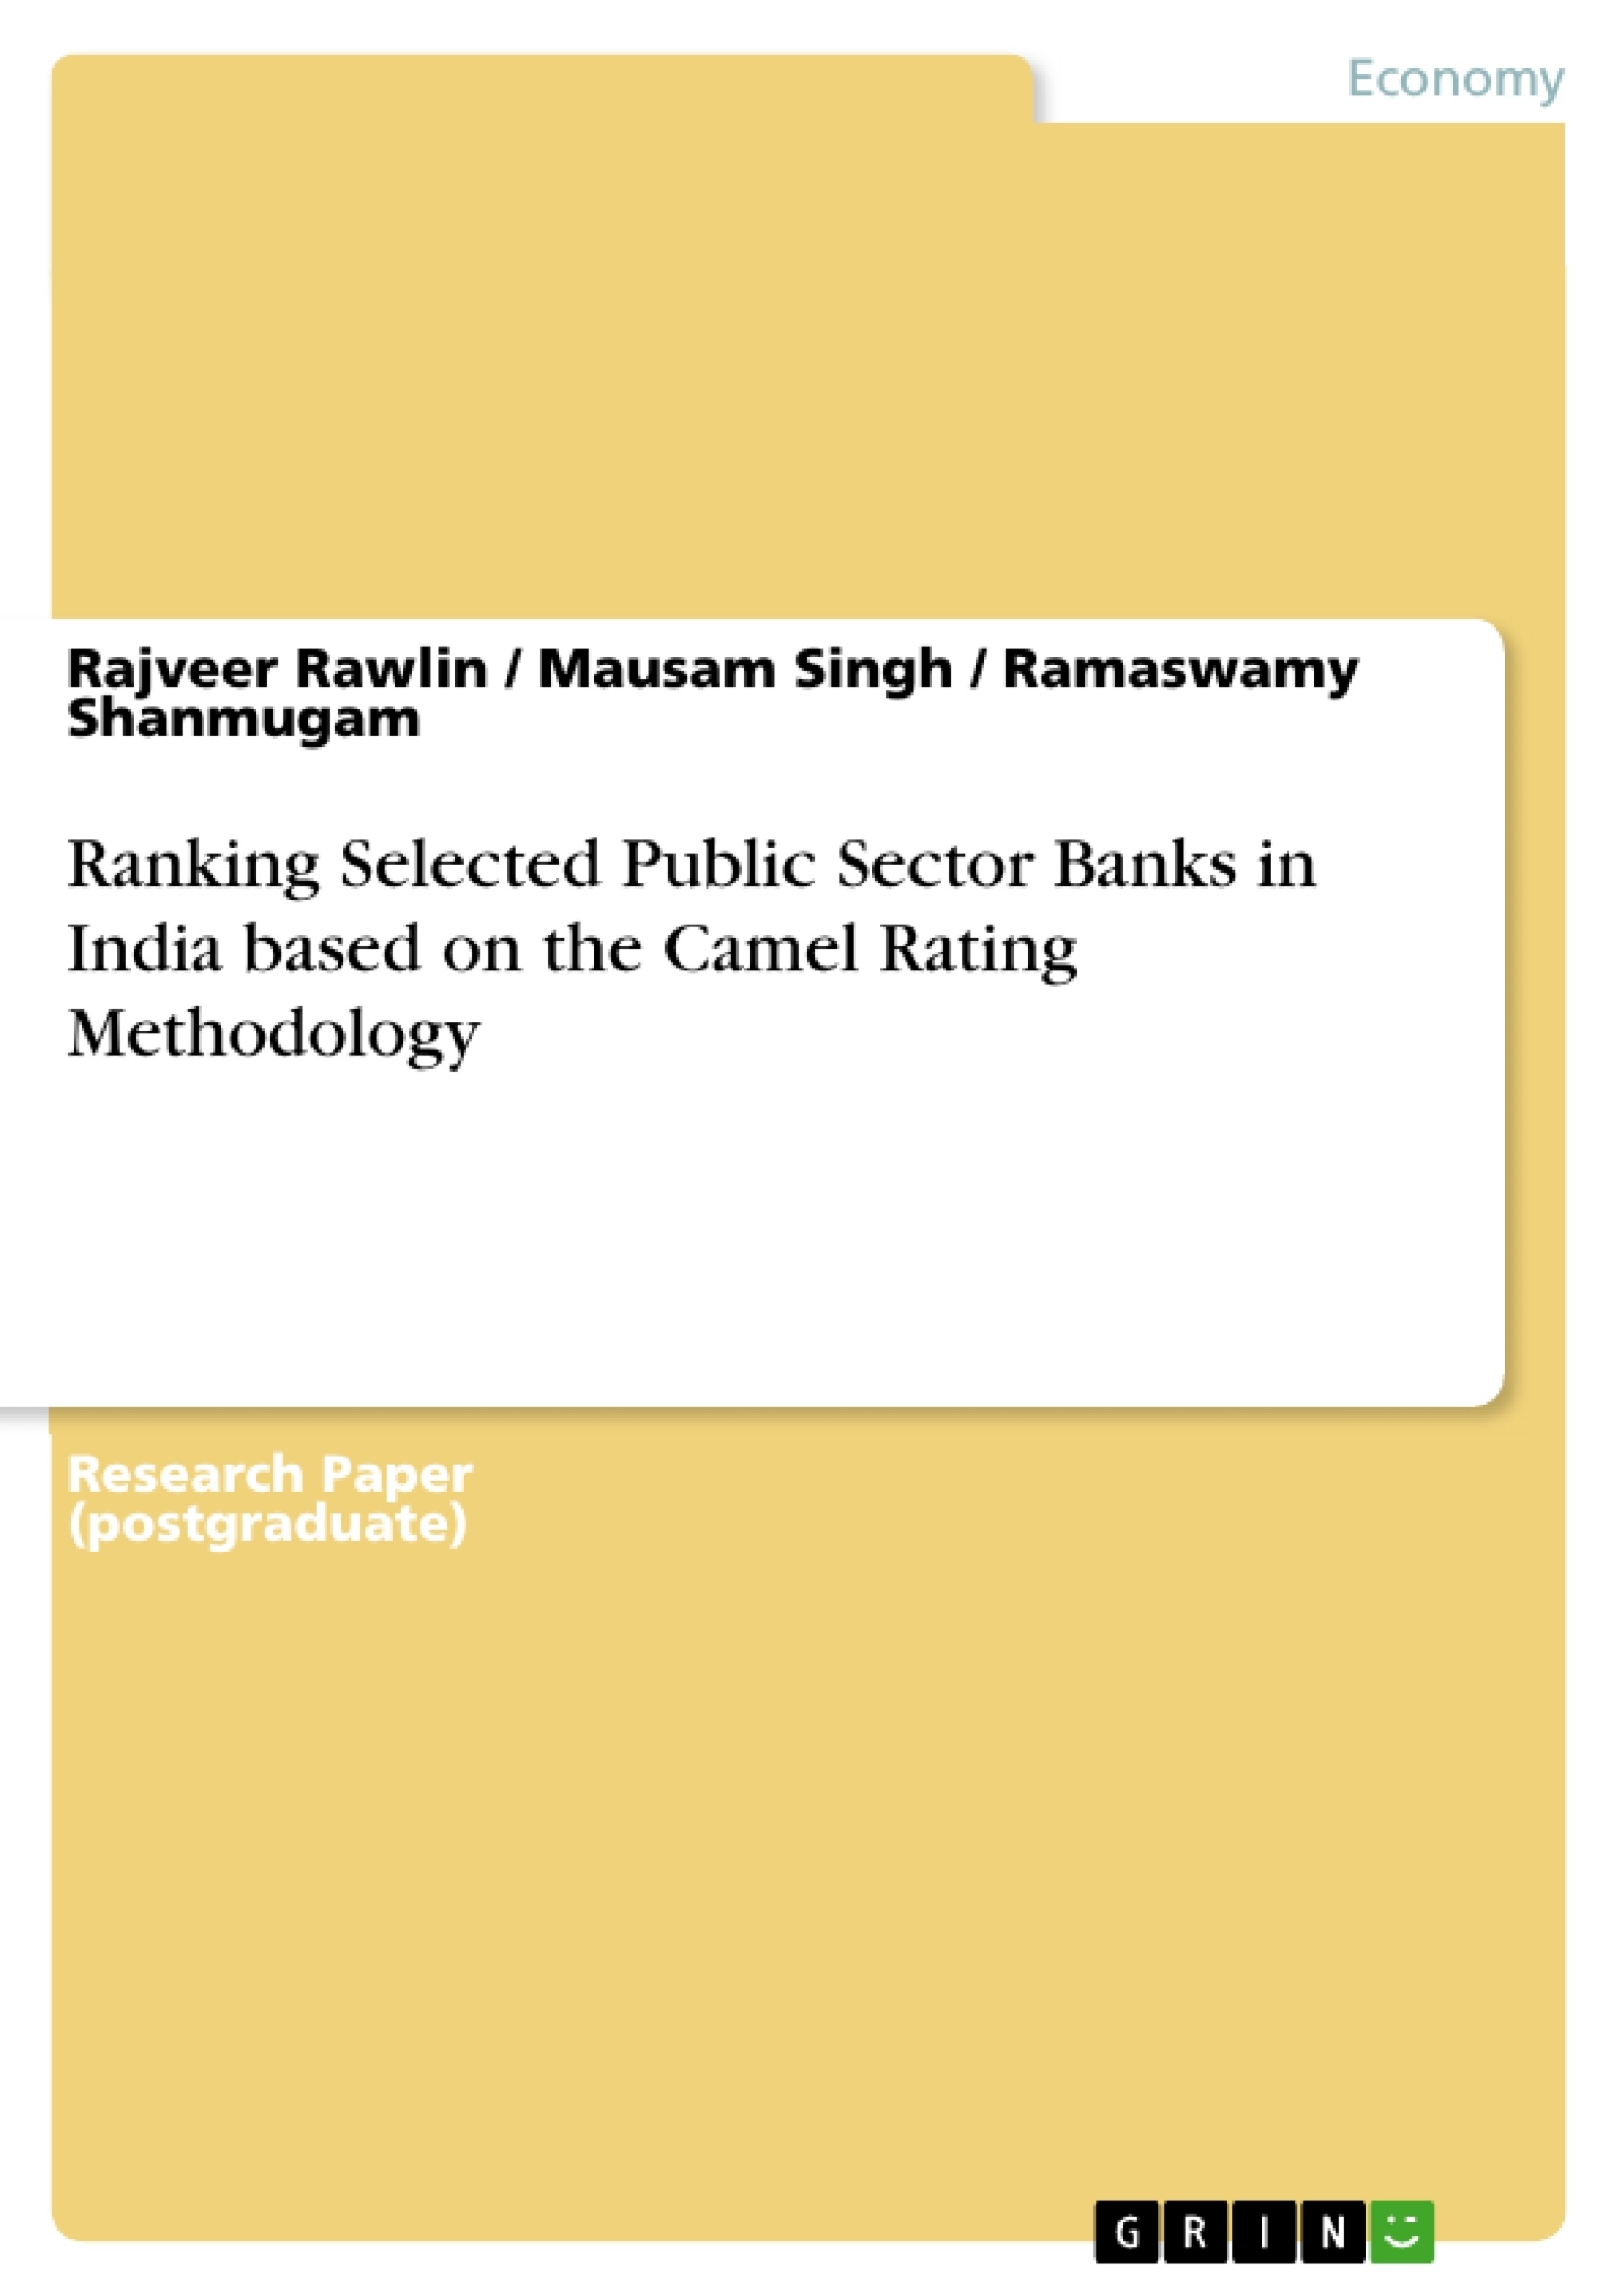 Título: Ranking Selected Public Sector Banks in India based on the Camel Rating Methodology